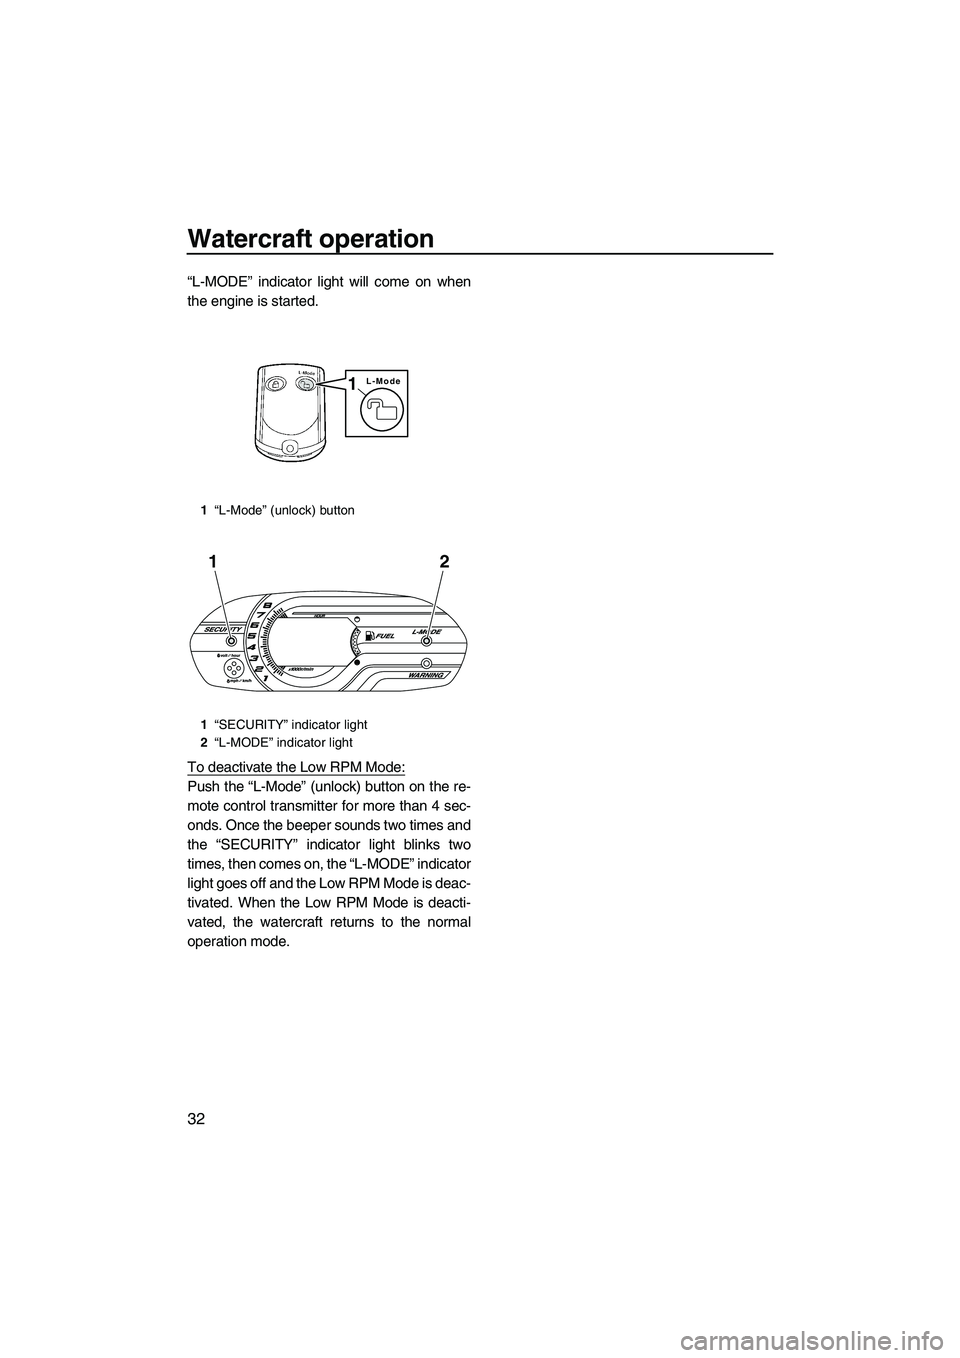 YAMAHA VX SPORT 2013  Owners Manual Watercraft operation
32
“L-MODE” indicator light will come on when
the engine is started.
To deactivate the Low RPM Mode:
Push the “L-Mode” (unlock) button on the re-
mote control transmitter 